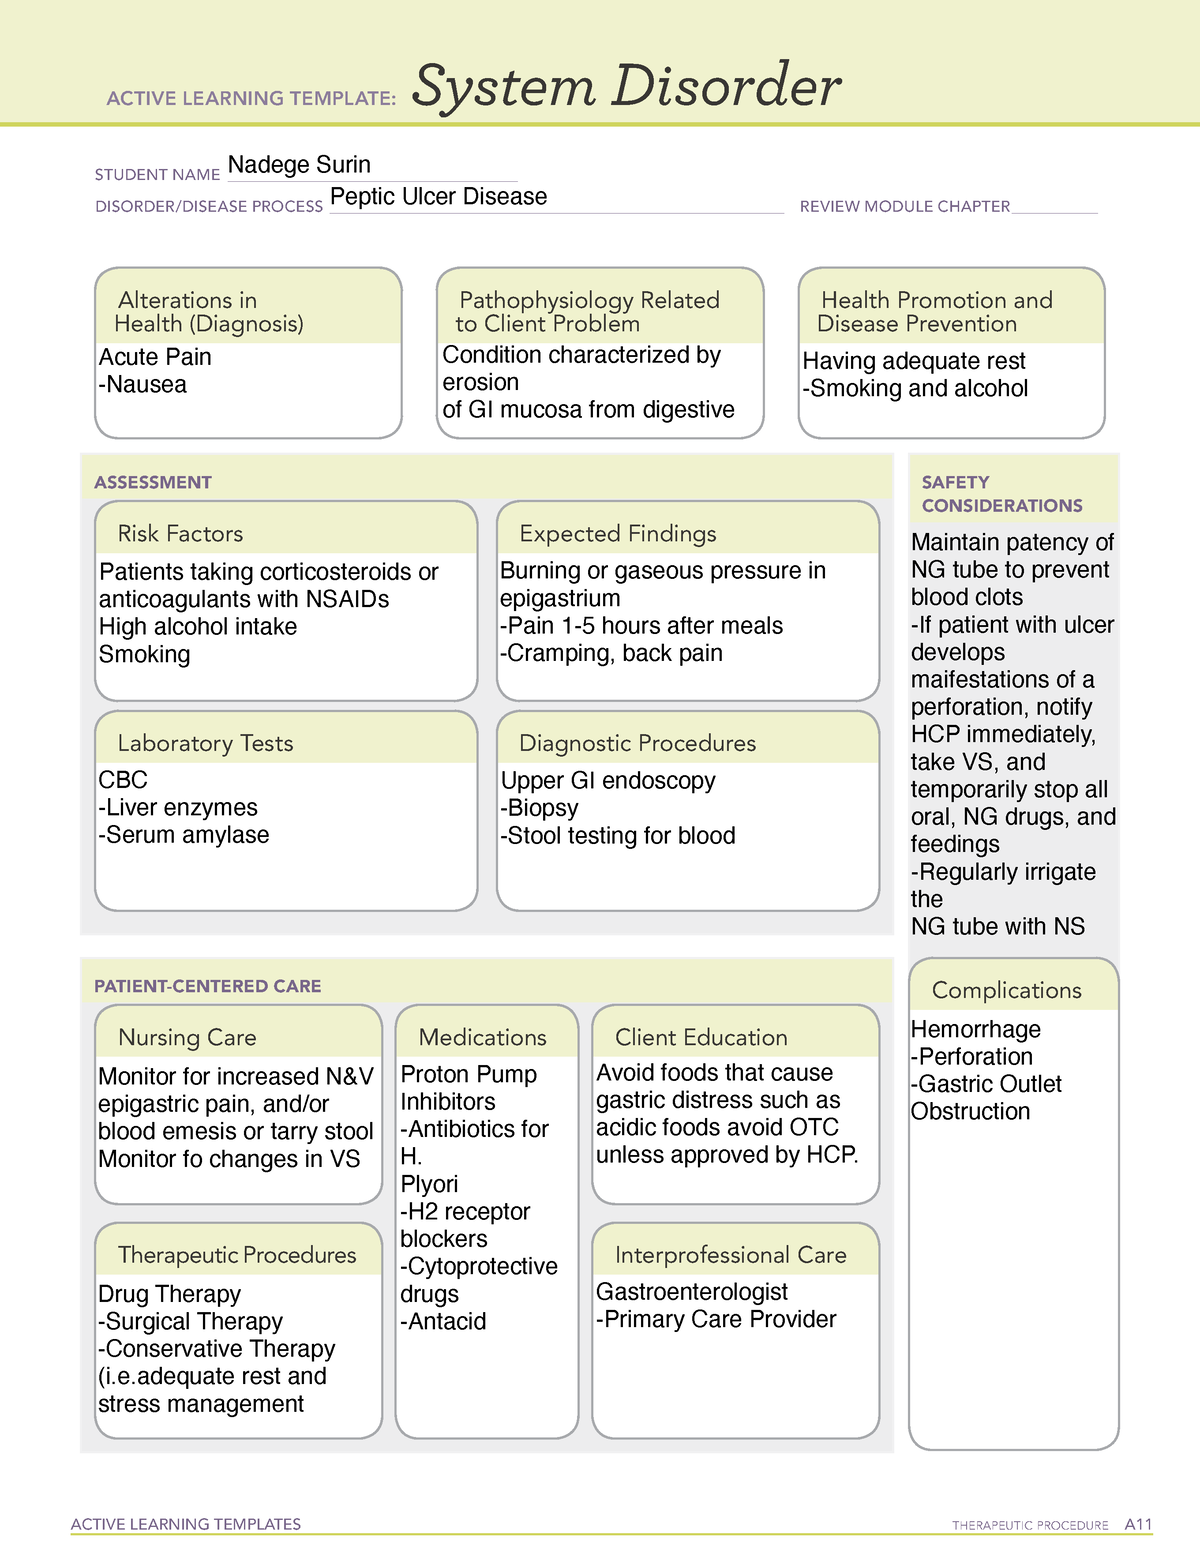 Peptic Ulcer Disease system disorder ACTIVE LEARNING TEMPLATES